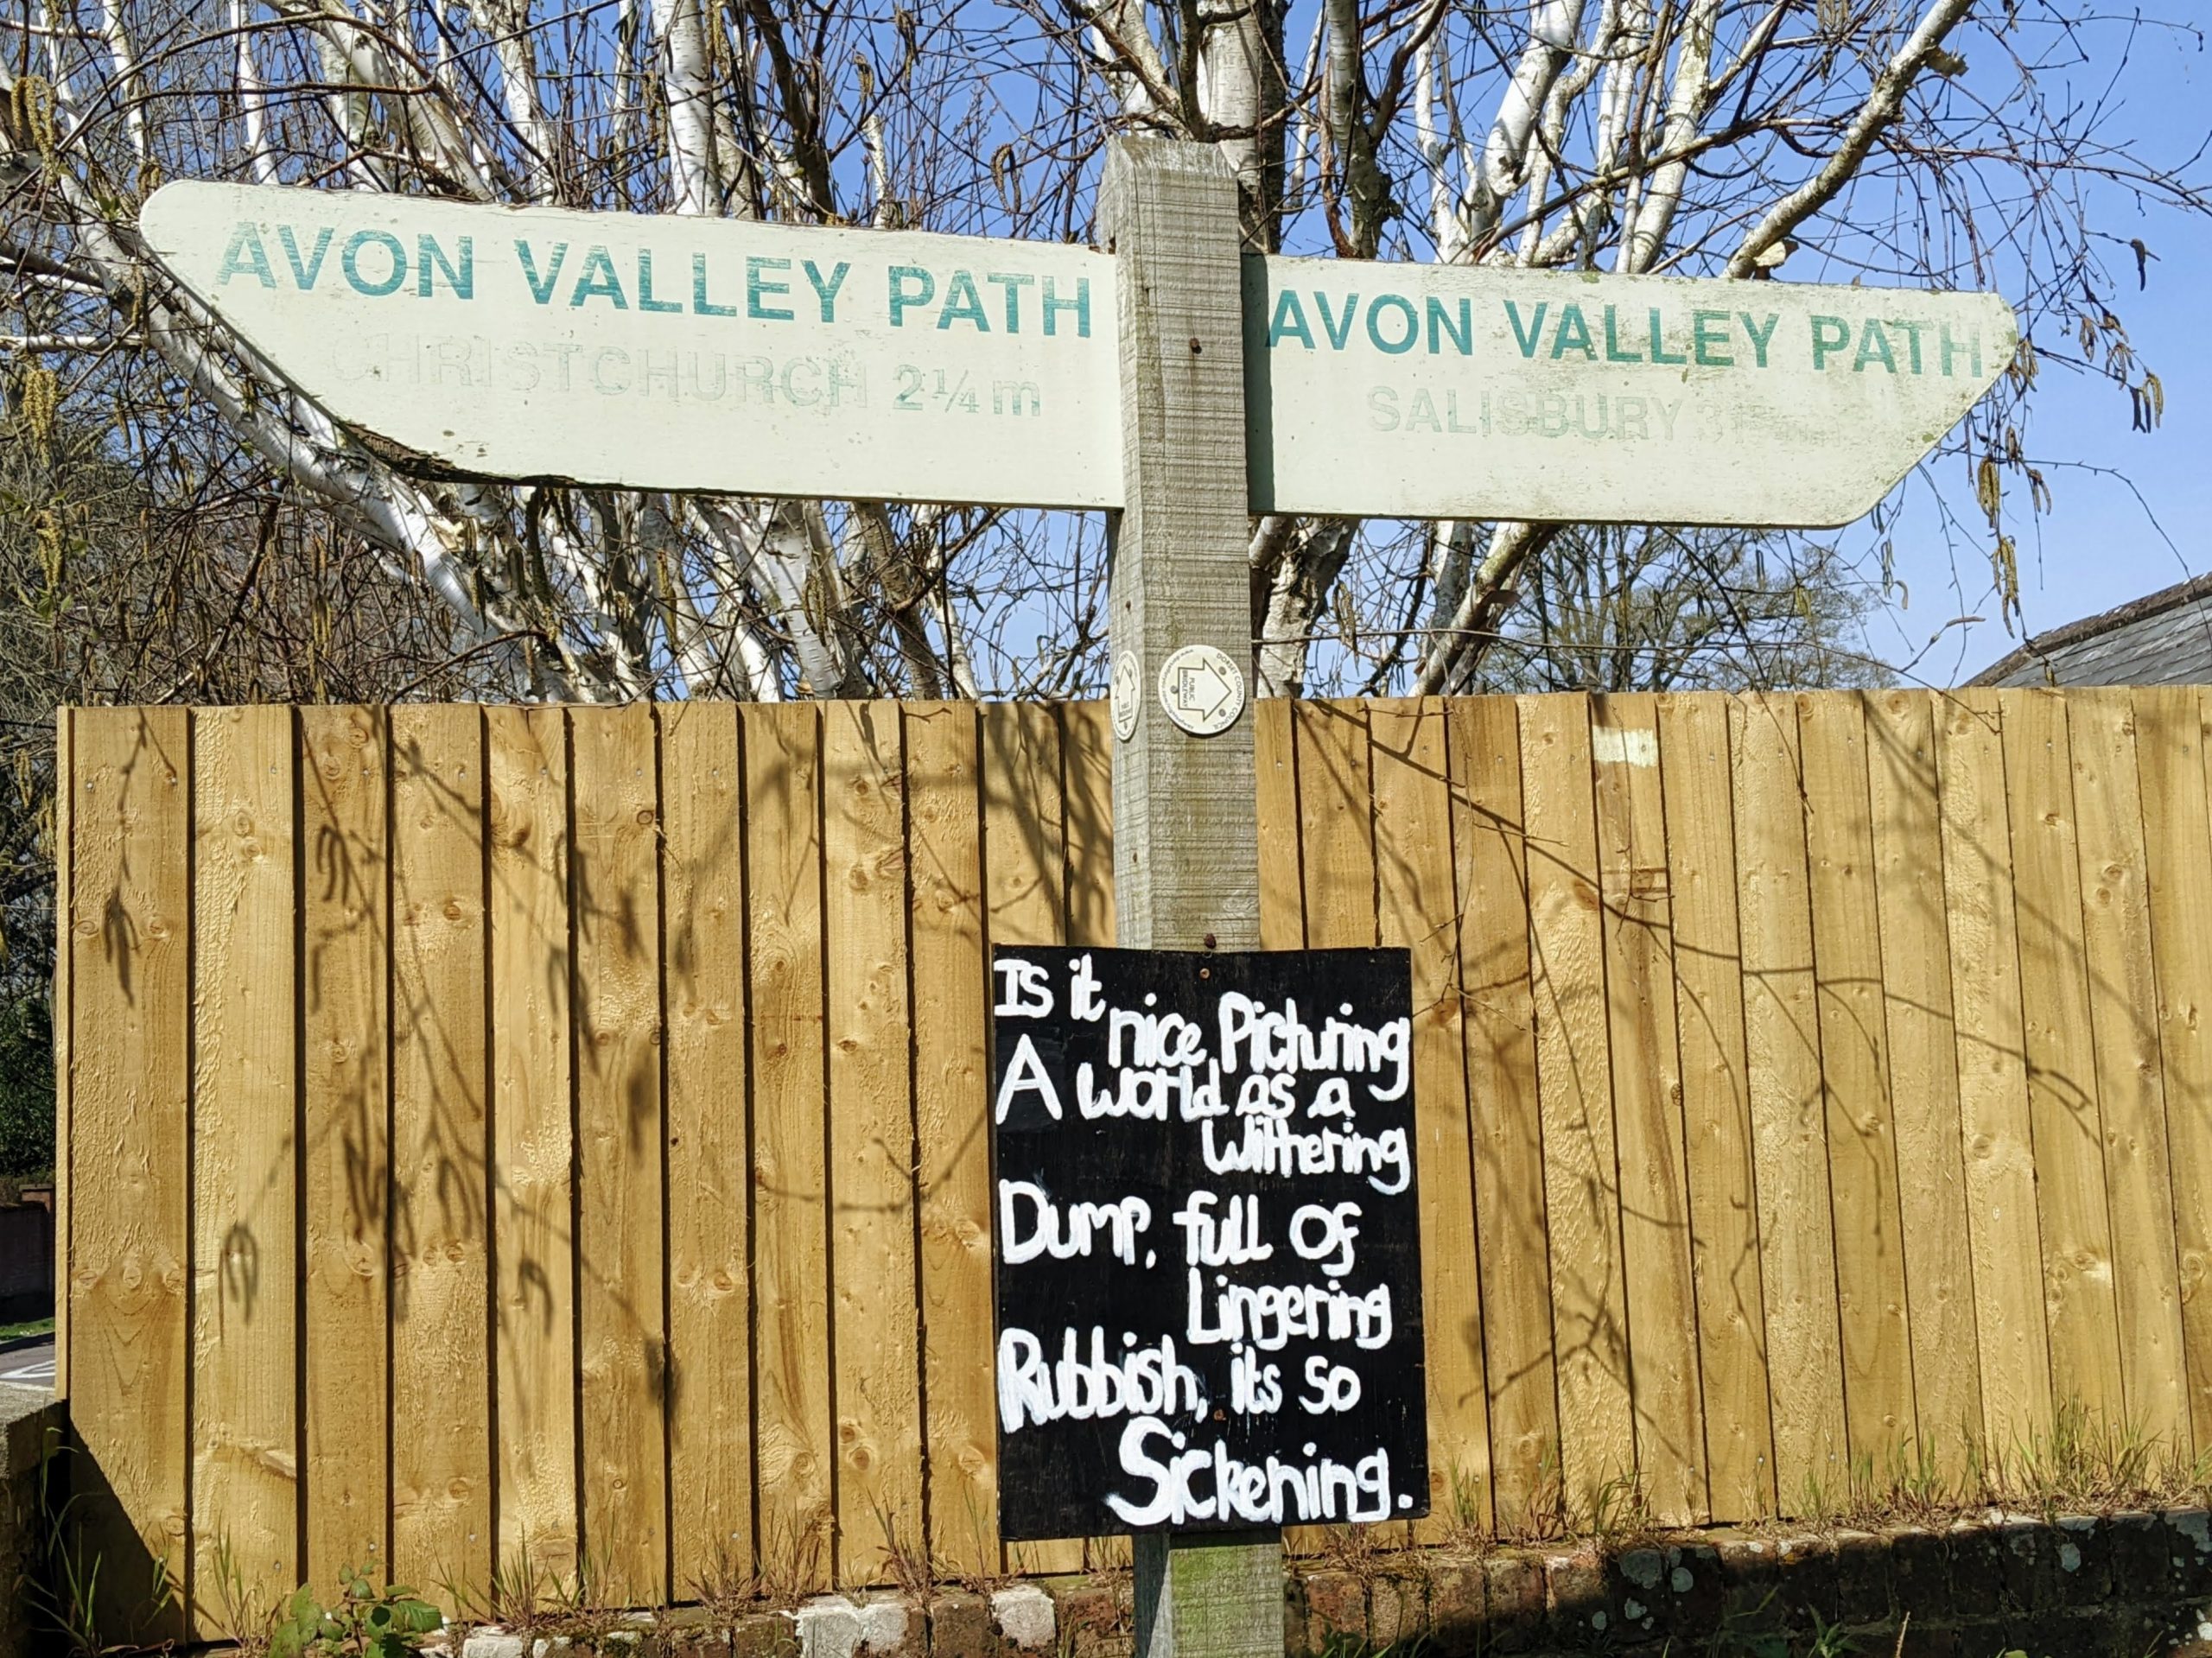 Signs on the Avon Valley Path